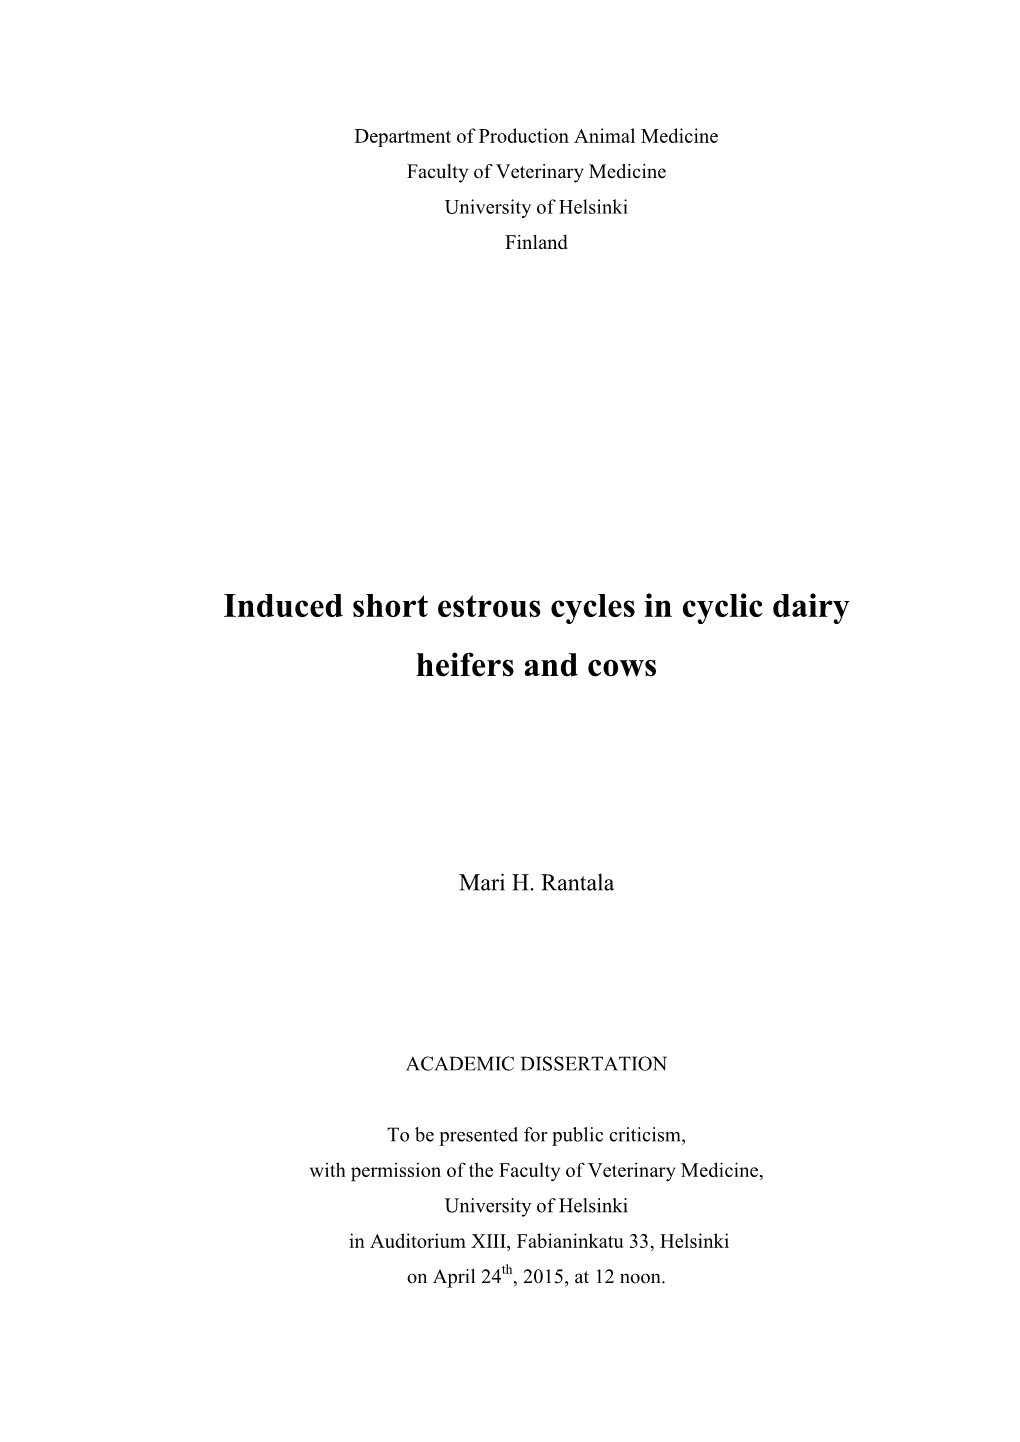 Induced Short Estrous Cycles in Cyclic Dairy Heifers and Cows